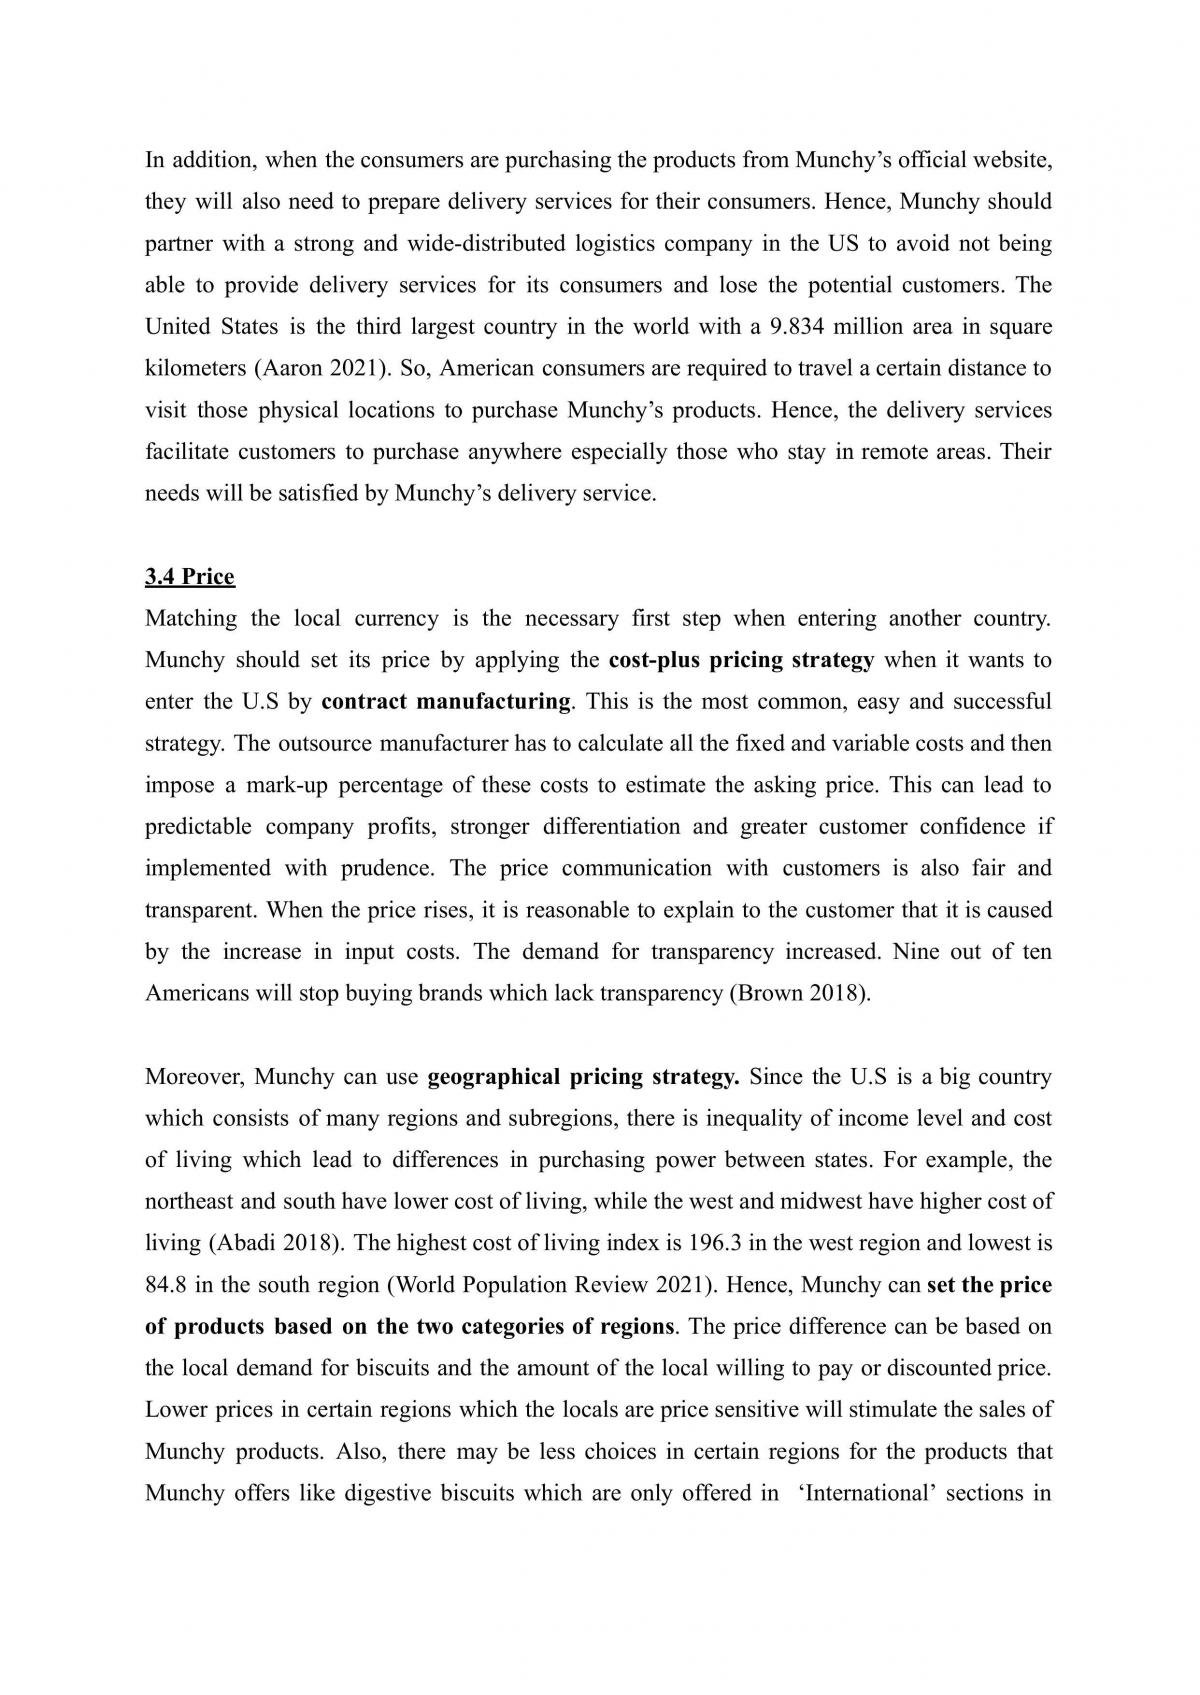 Essay discussing international marketing strategy of Munchy - Page 11